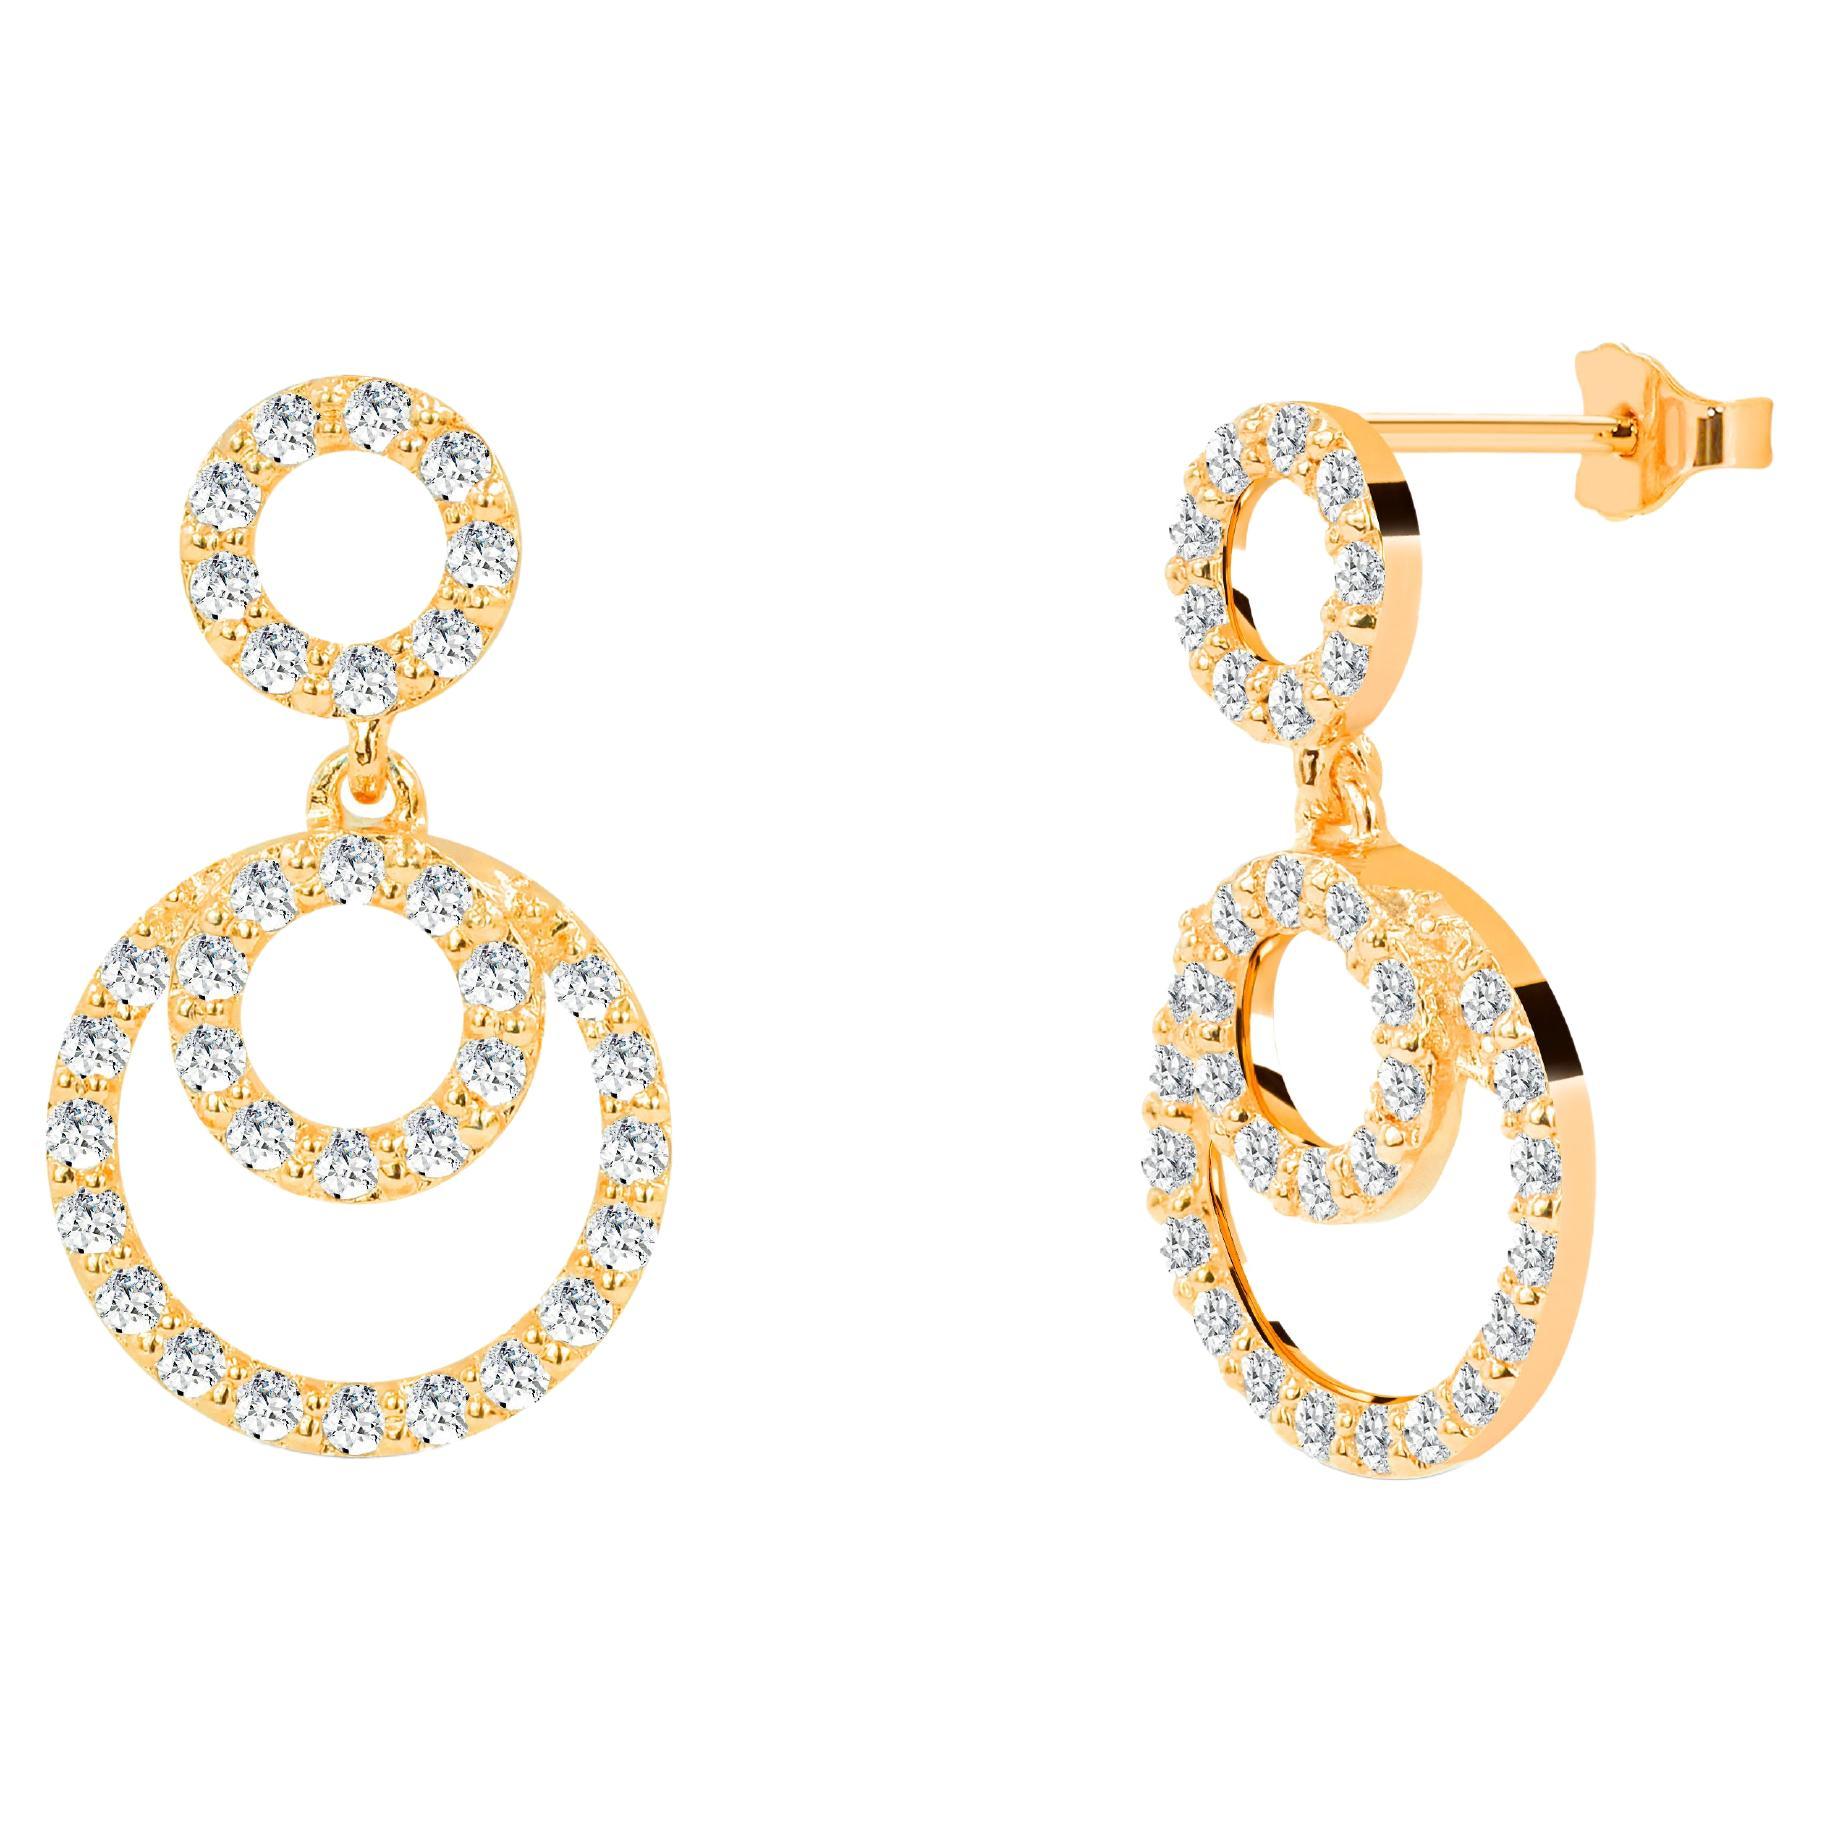 0.51ct Diamond Circle Studs Earrings in 14k Gold For Sale